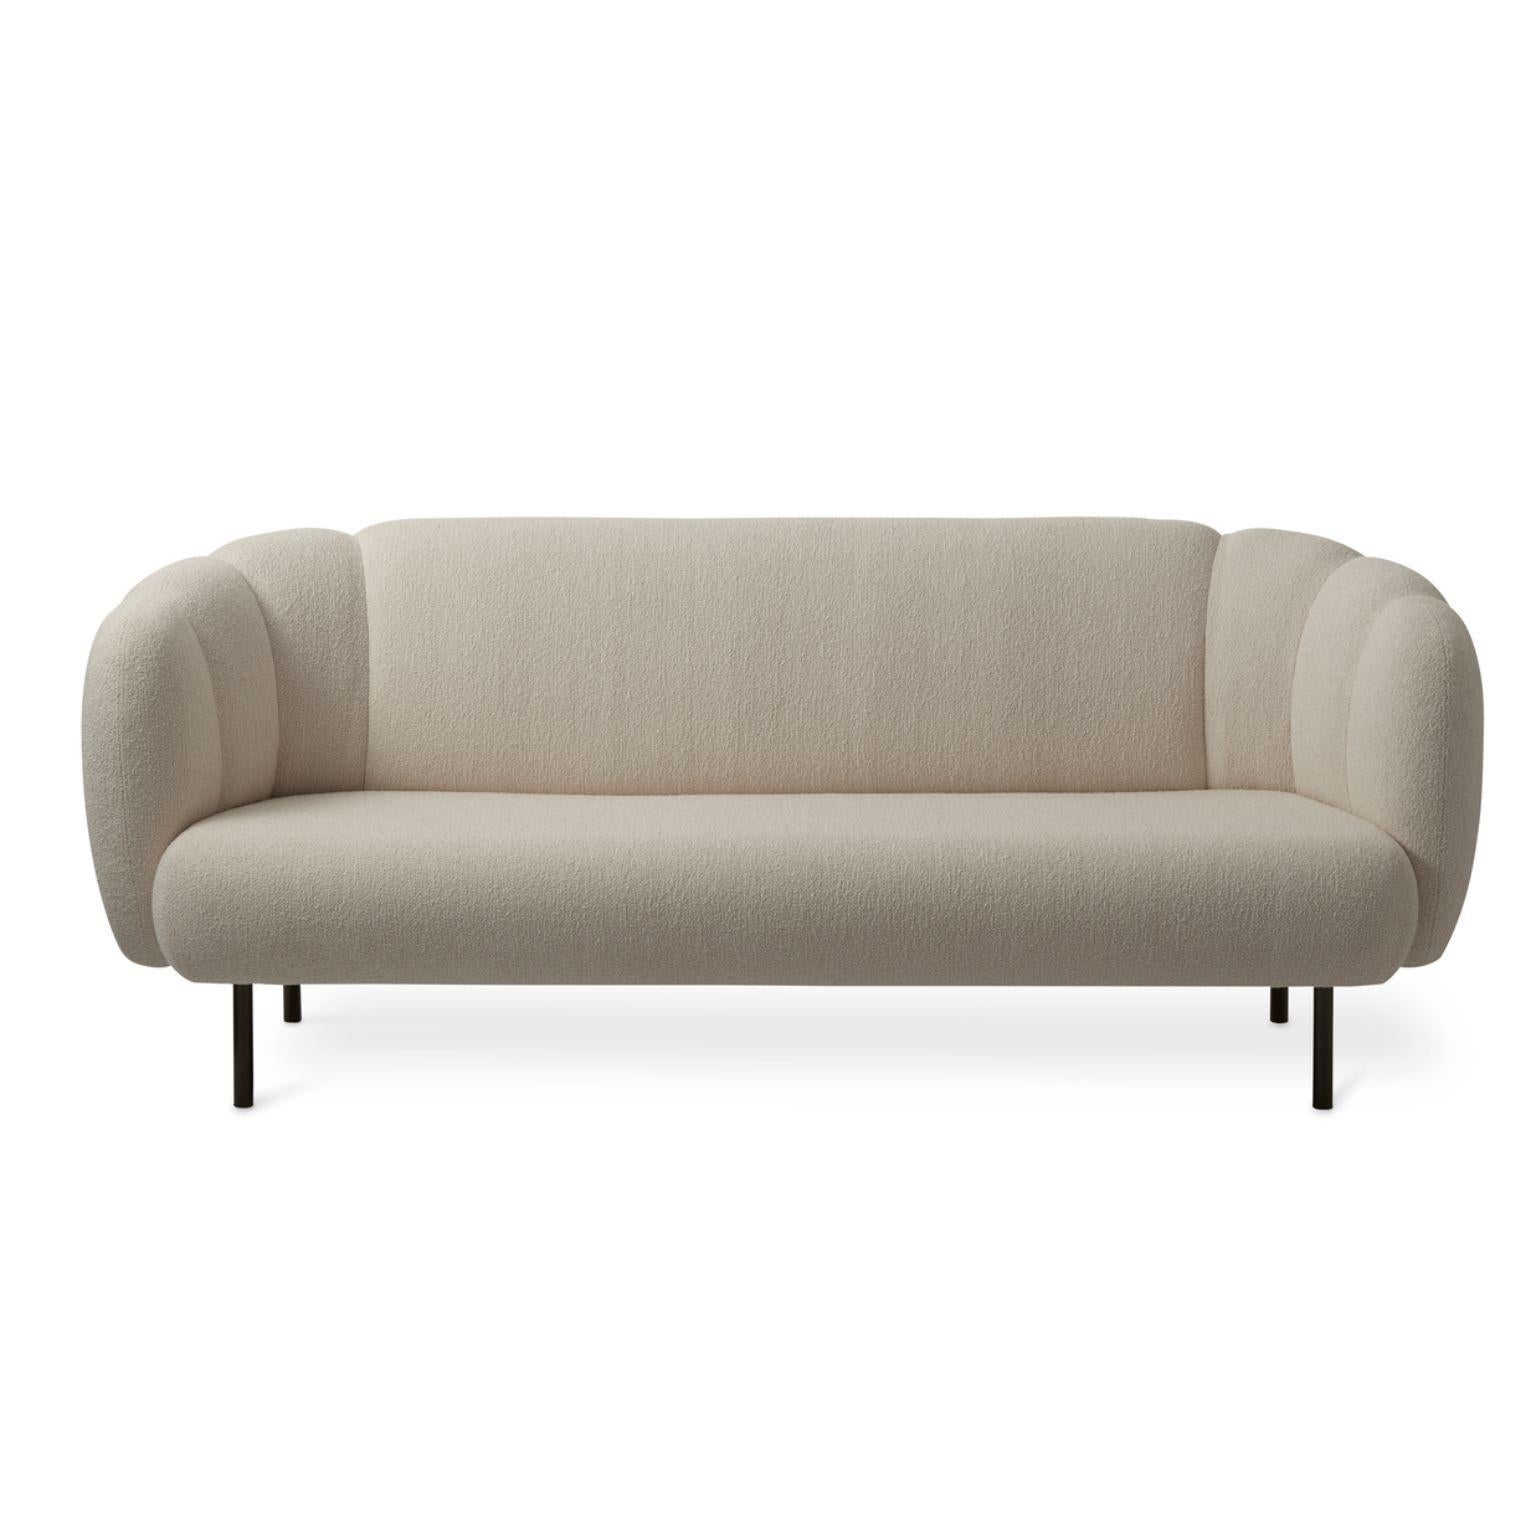 Caper 3 seater with stitches sand by Warm Nordic
Dimensions: D 200 x W 84 x H 80 cm
Material: Textile upholstery, Wooden frame, Powder coated black steel legs.
Weight: 55.5 kg
Also available in different colours and finishes.

An elegant sofa